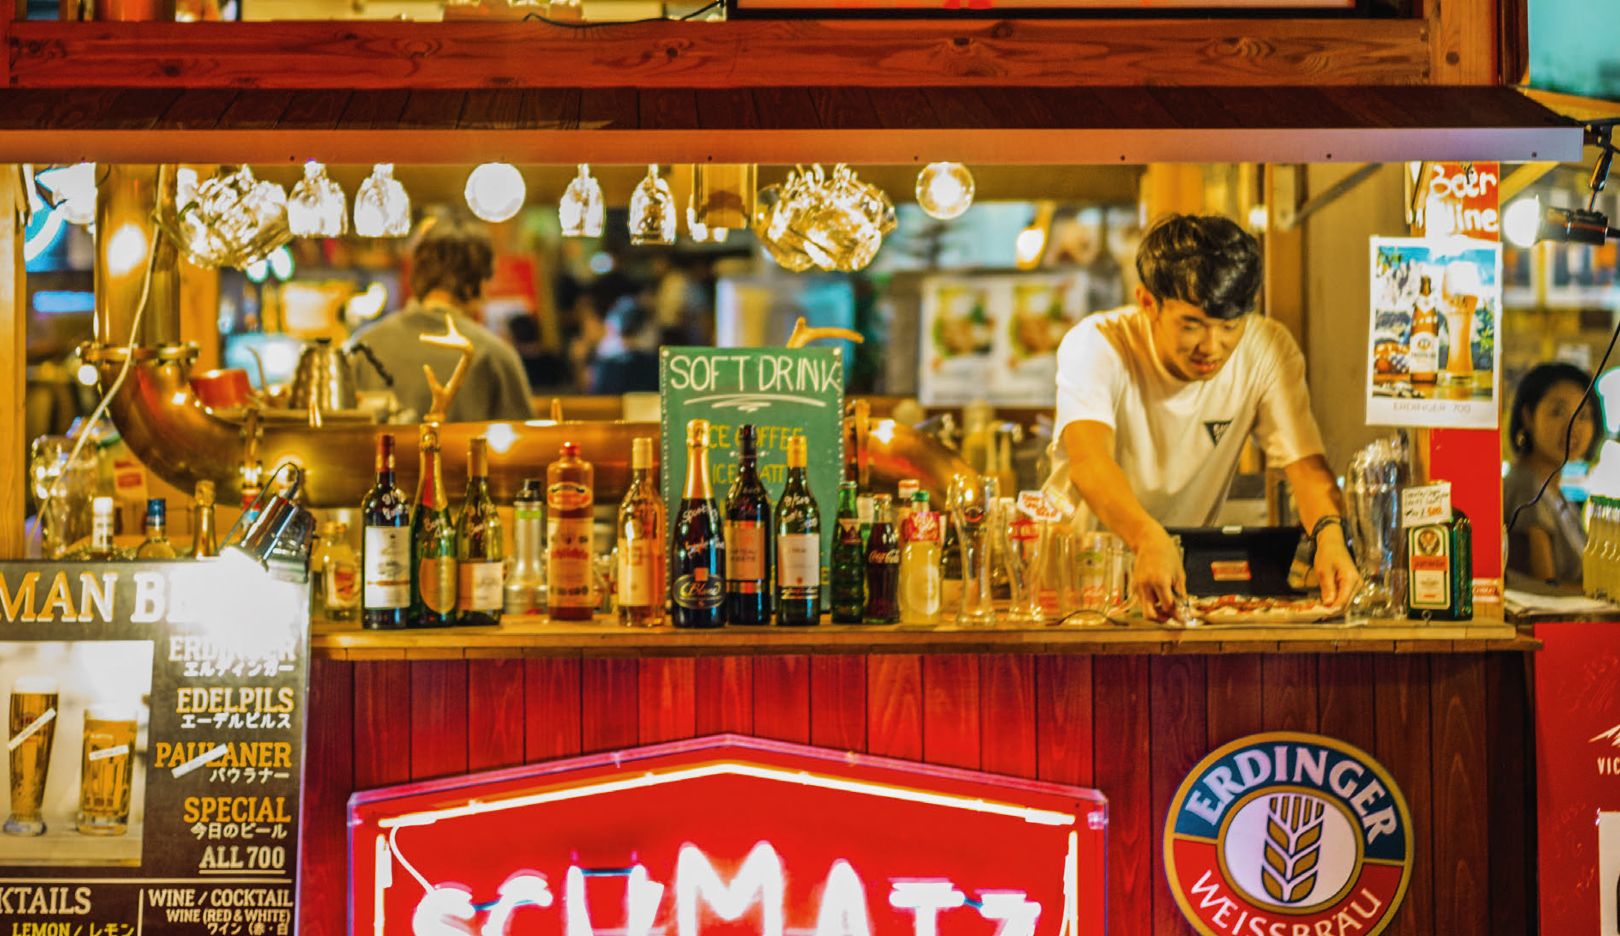 A piece of Germany: André Lotterer found the Schmatz stand in Toyko—with its schnitzel burgers, wursts, and German beer, it reminded him of his homeland.